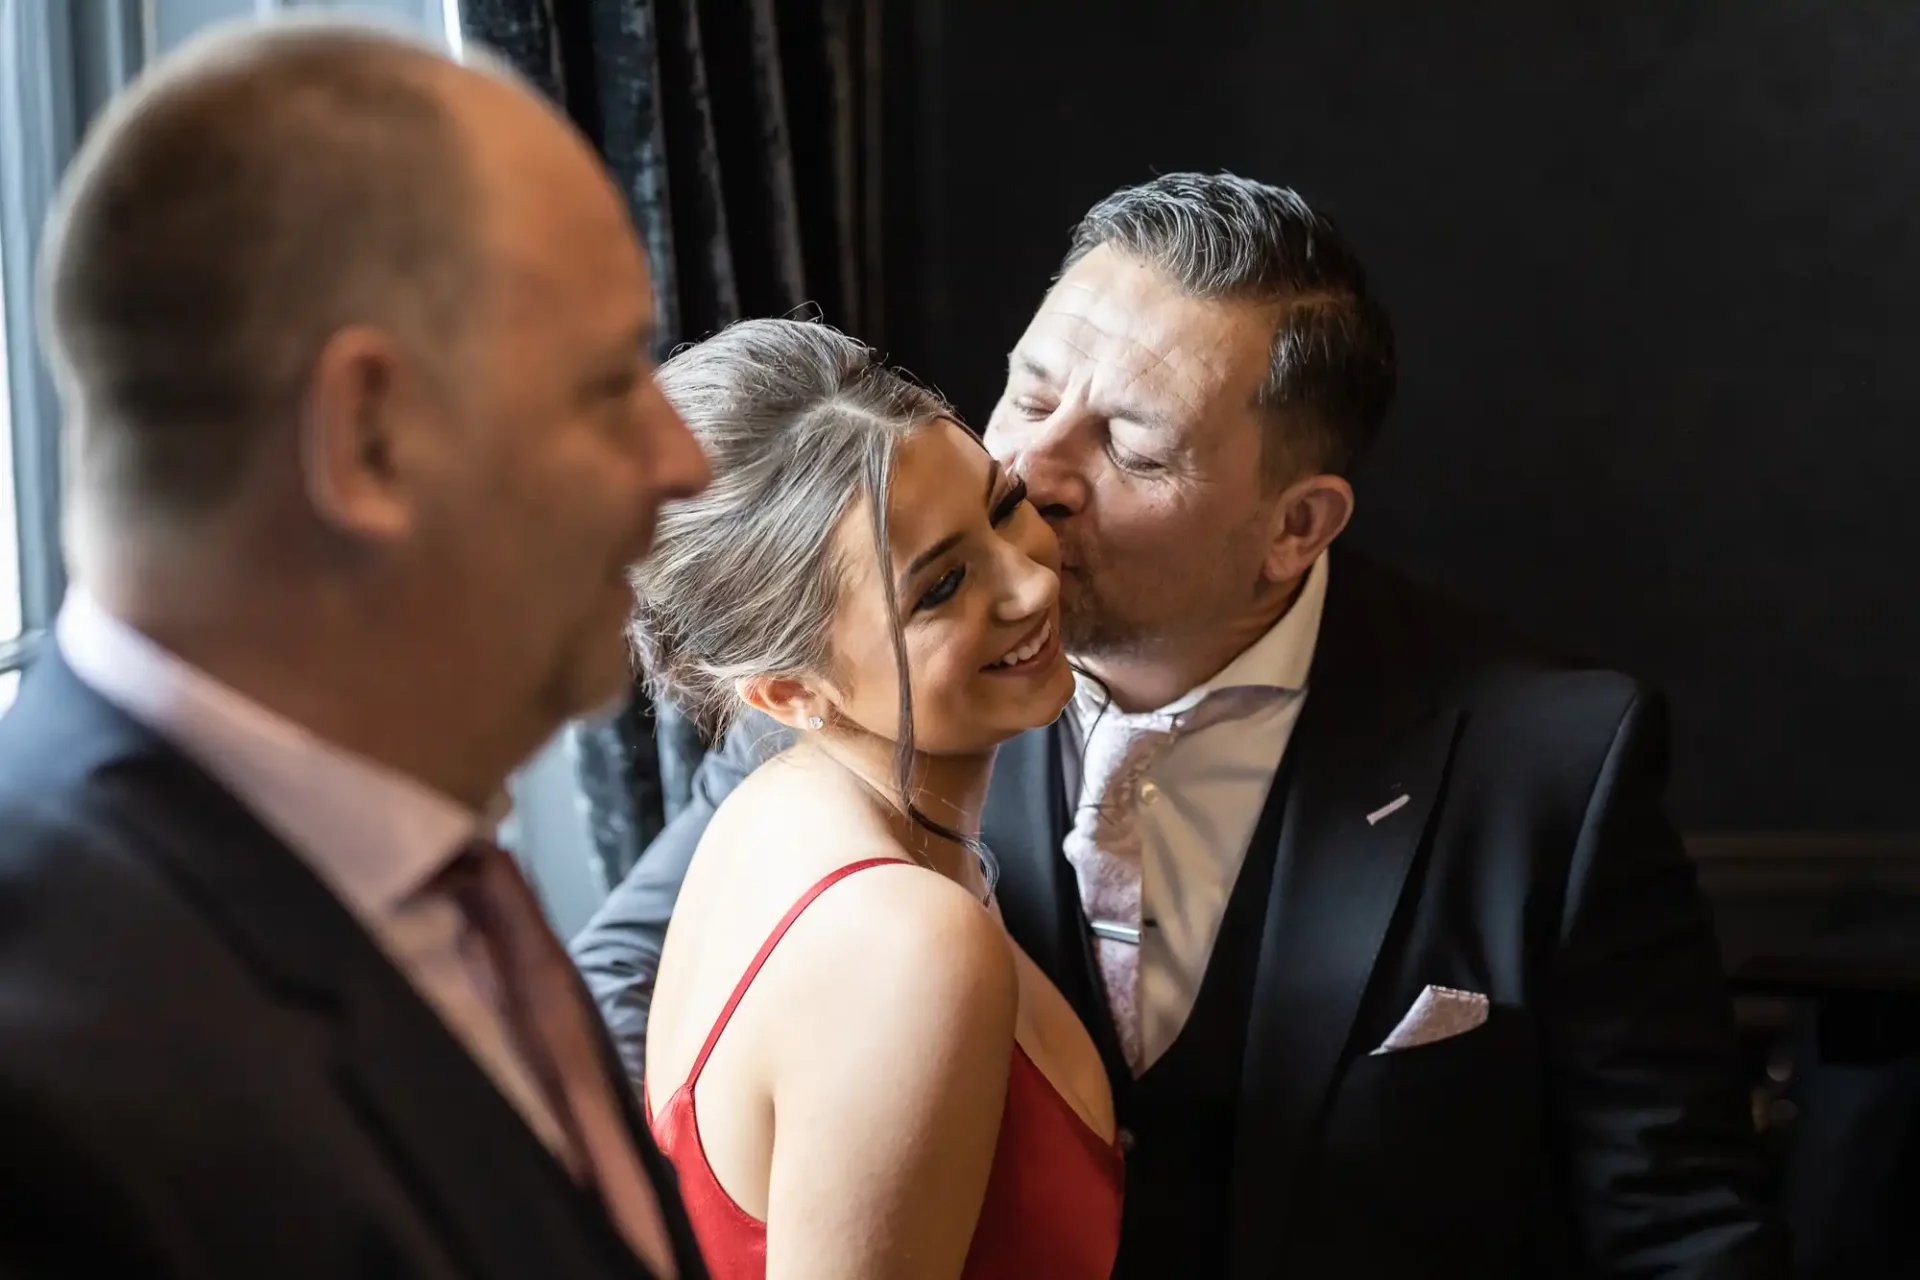 Man in a suit kisses a smiling young woman on the cheek at a formal event, with another man in the foreground out of focus.